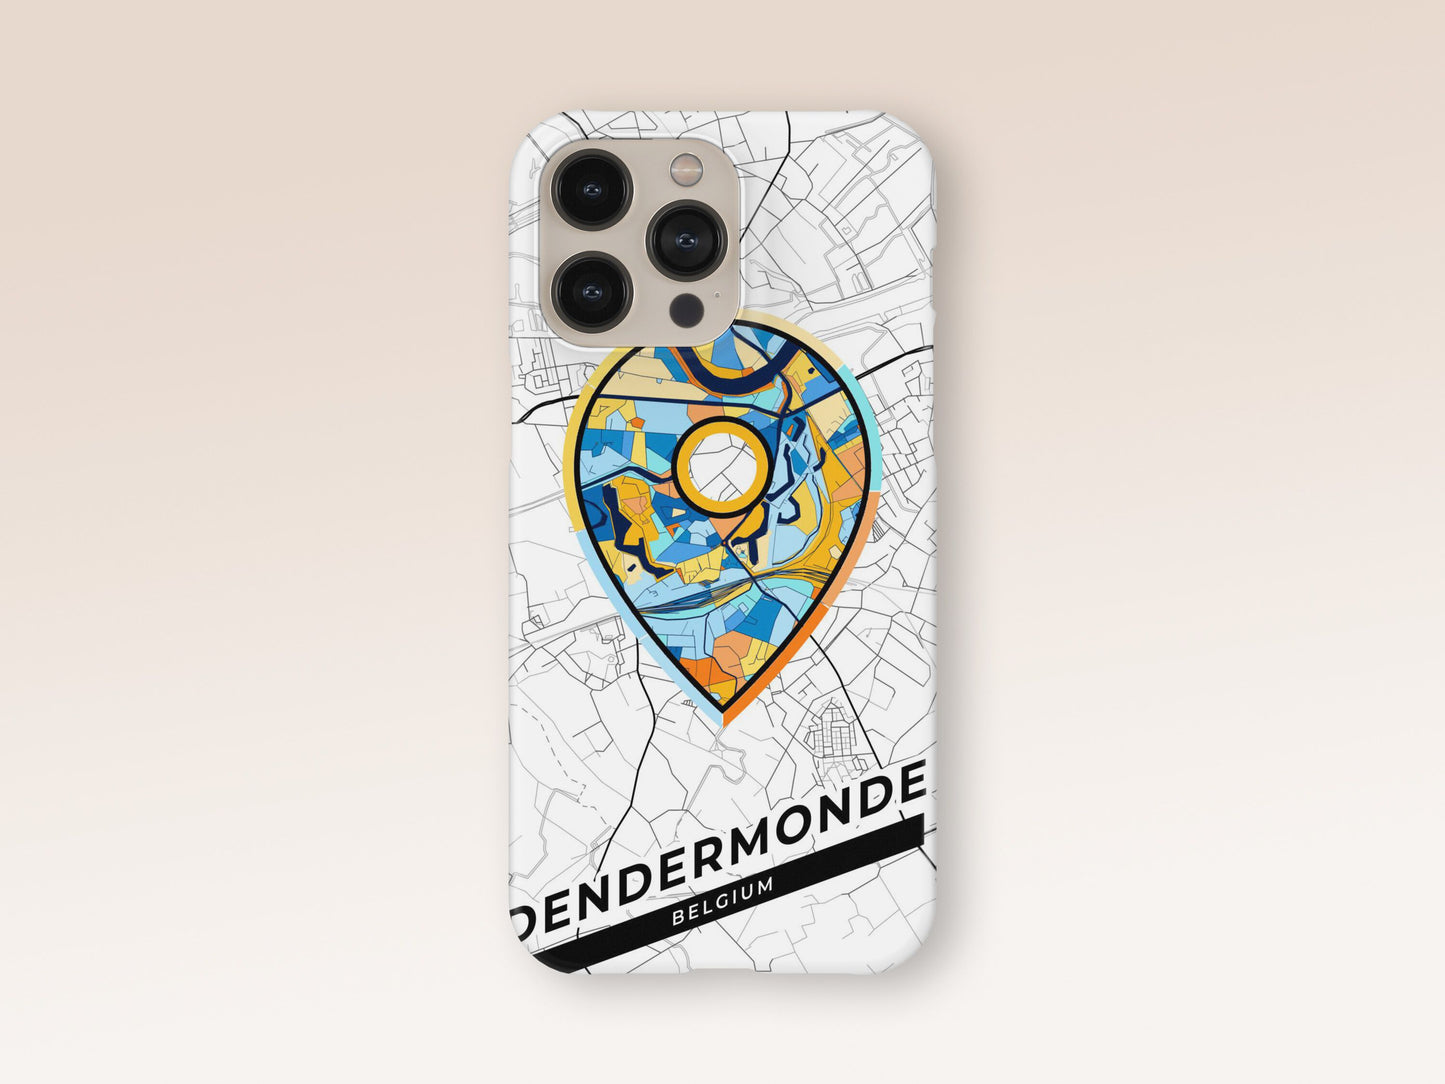 Dendermonde Belgium slim phone case with colorful icon. Birthday, wedding or housewarming gift. Couple match cases. 1